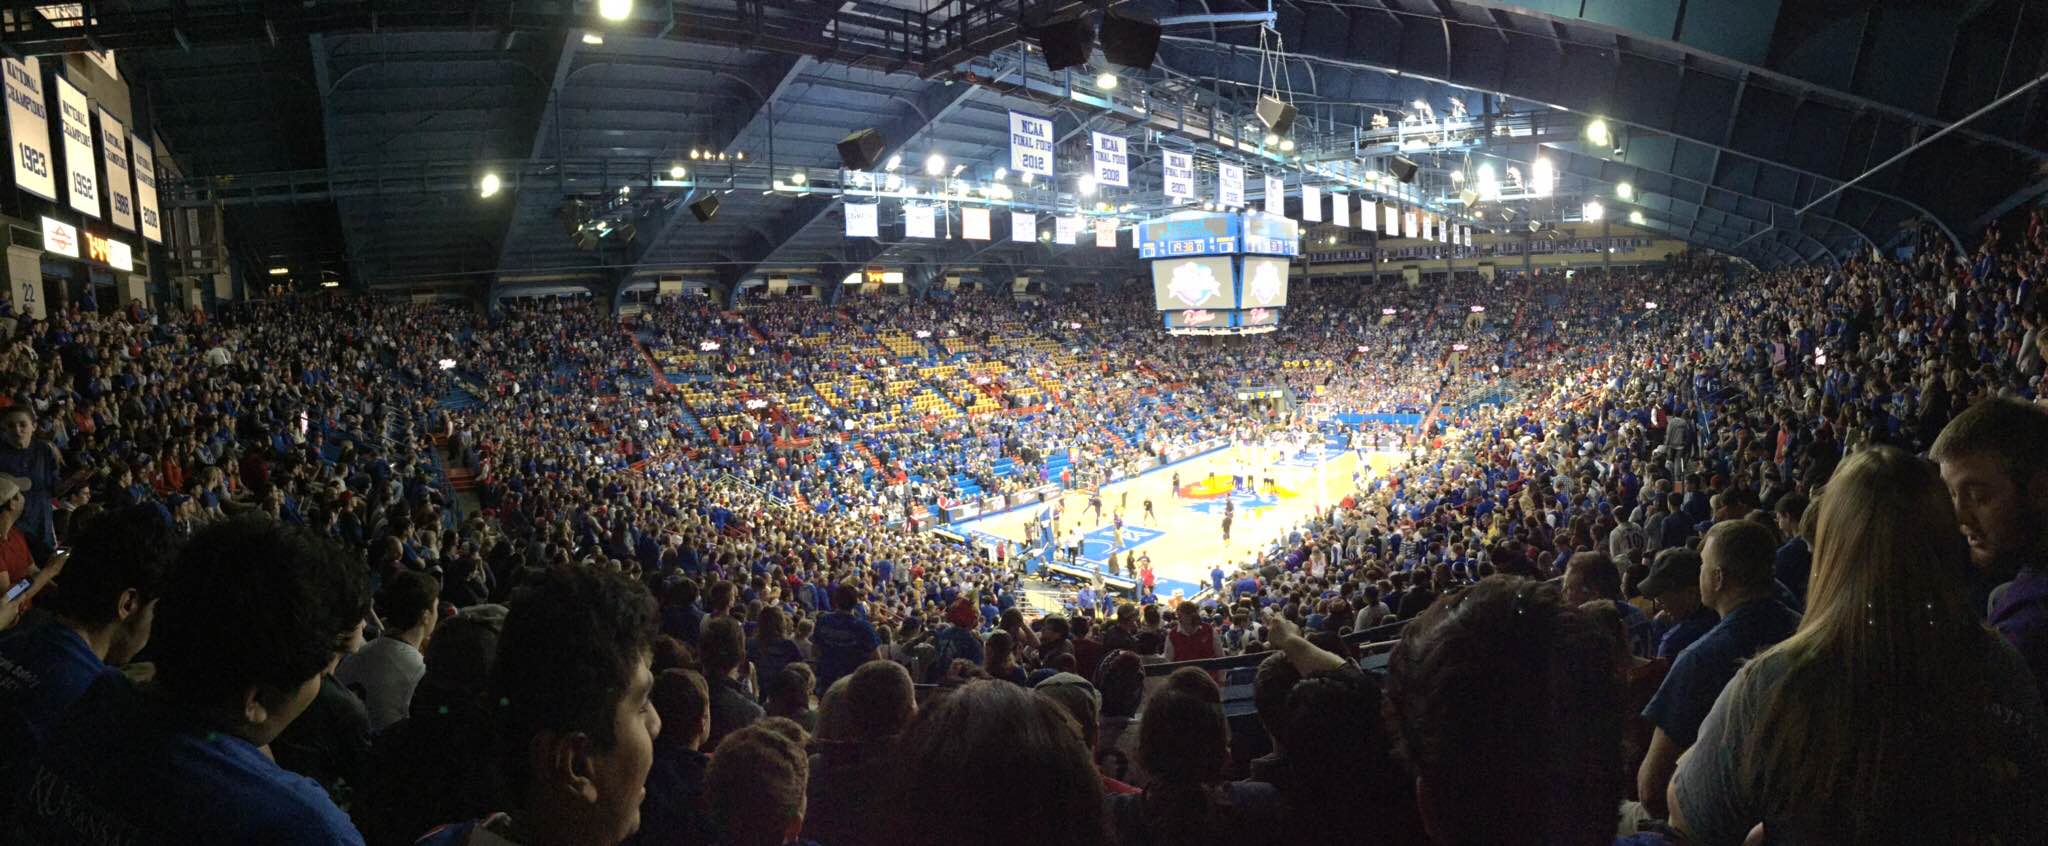 Shield 2014-2015 co-editor in chief Mary Stites, a KU freshman, attended this Jayhawks' home game at Phog Allen Fieldhouse. Photo by Mary Stites.